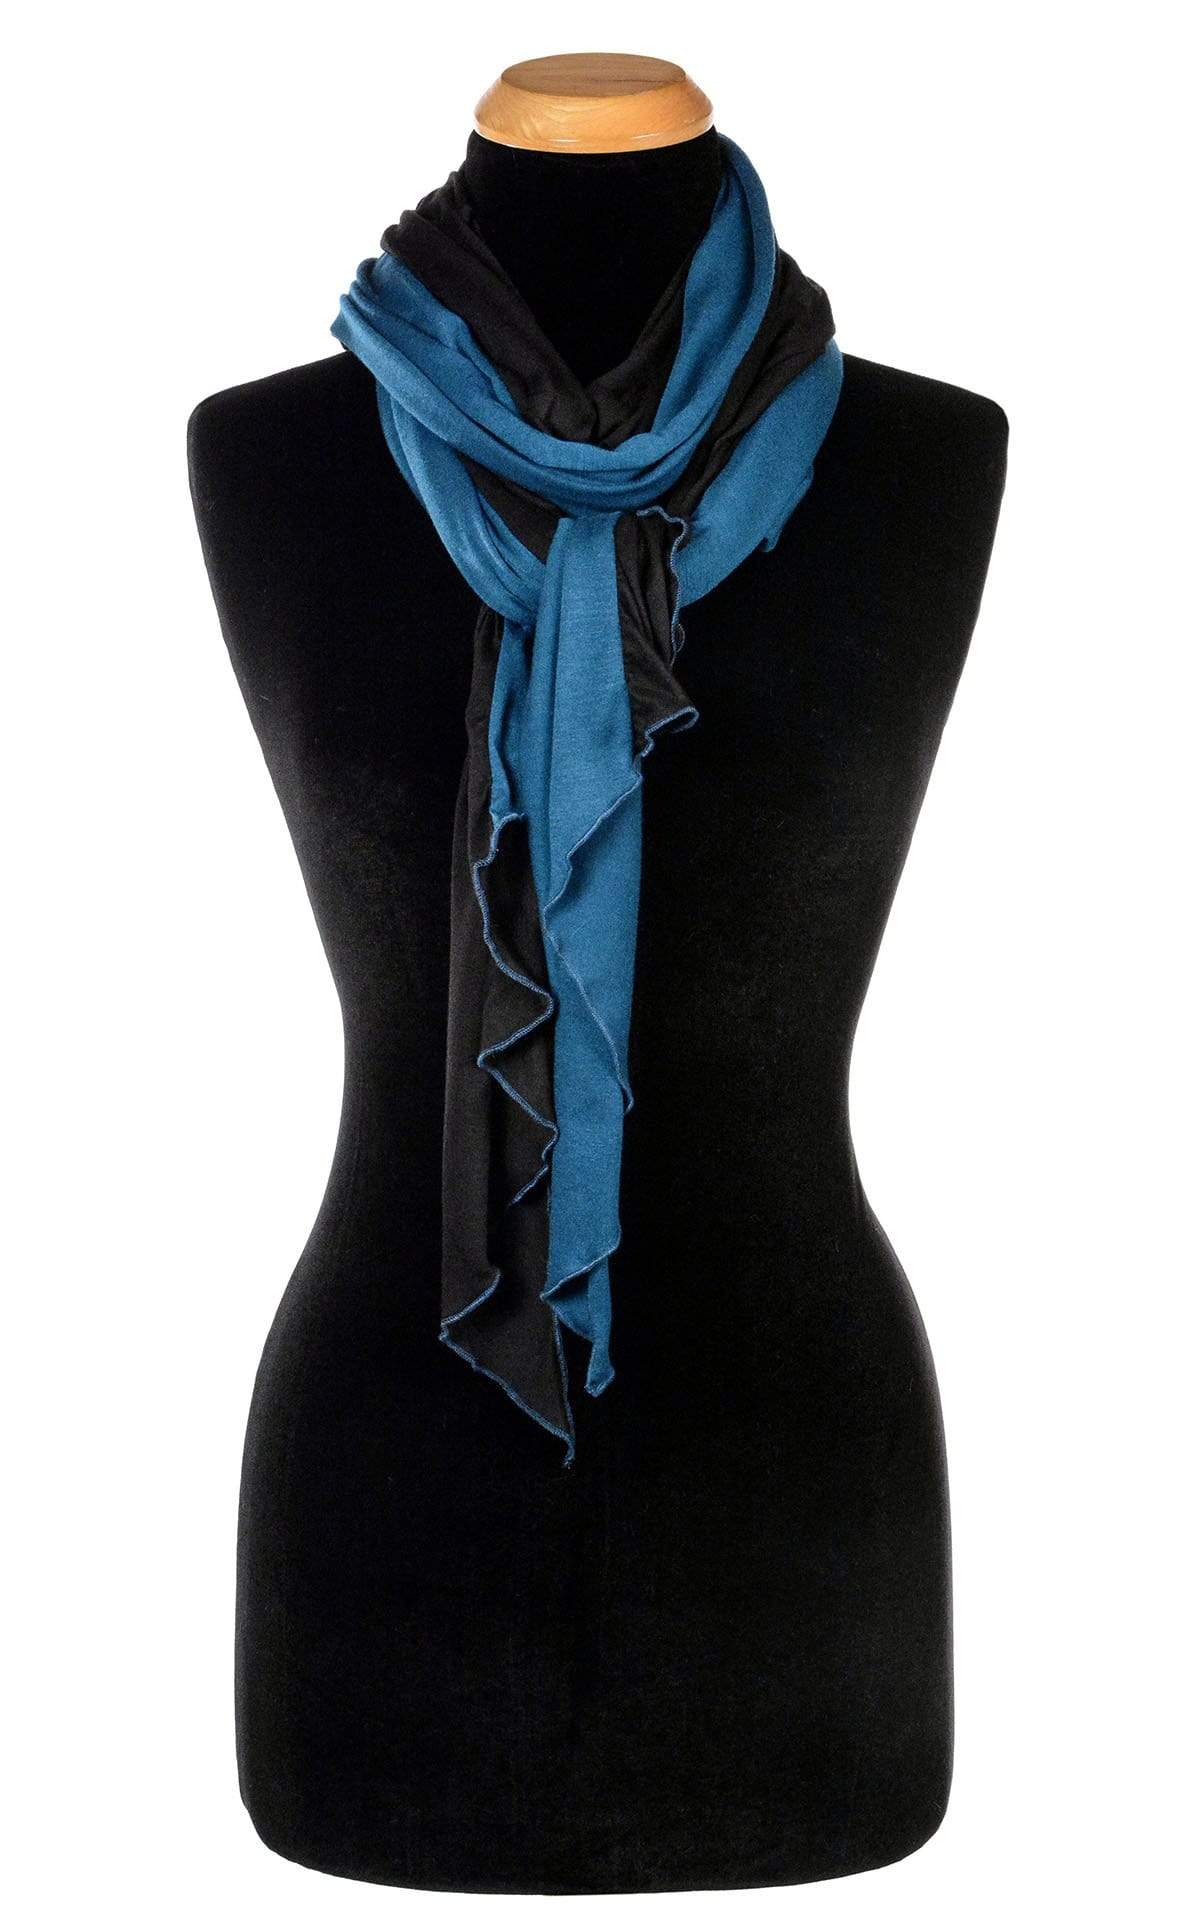 Ladies Large Handkerchief Scarf, Wrap jersey knit fabric on a mannequin tied in front | Abyss W/ Blue Moon, black and  Blue | Handmade in Seattle WA | Pandemonium Millinery